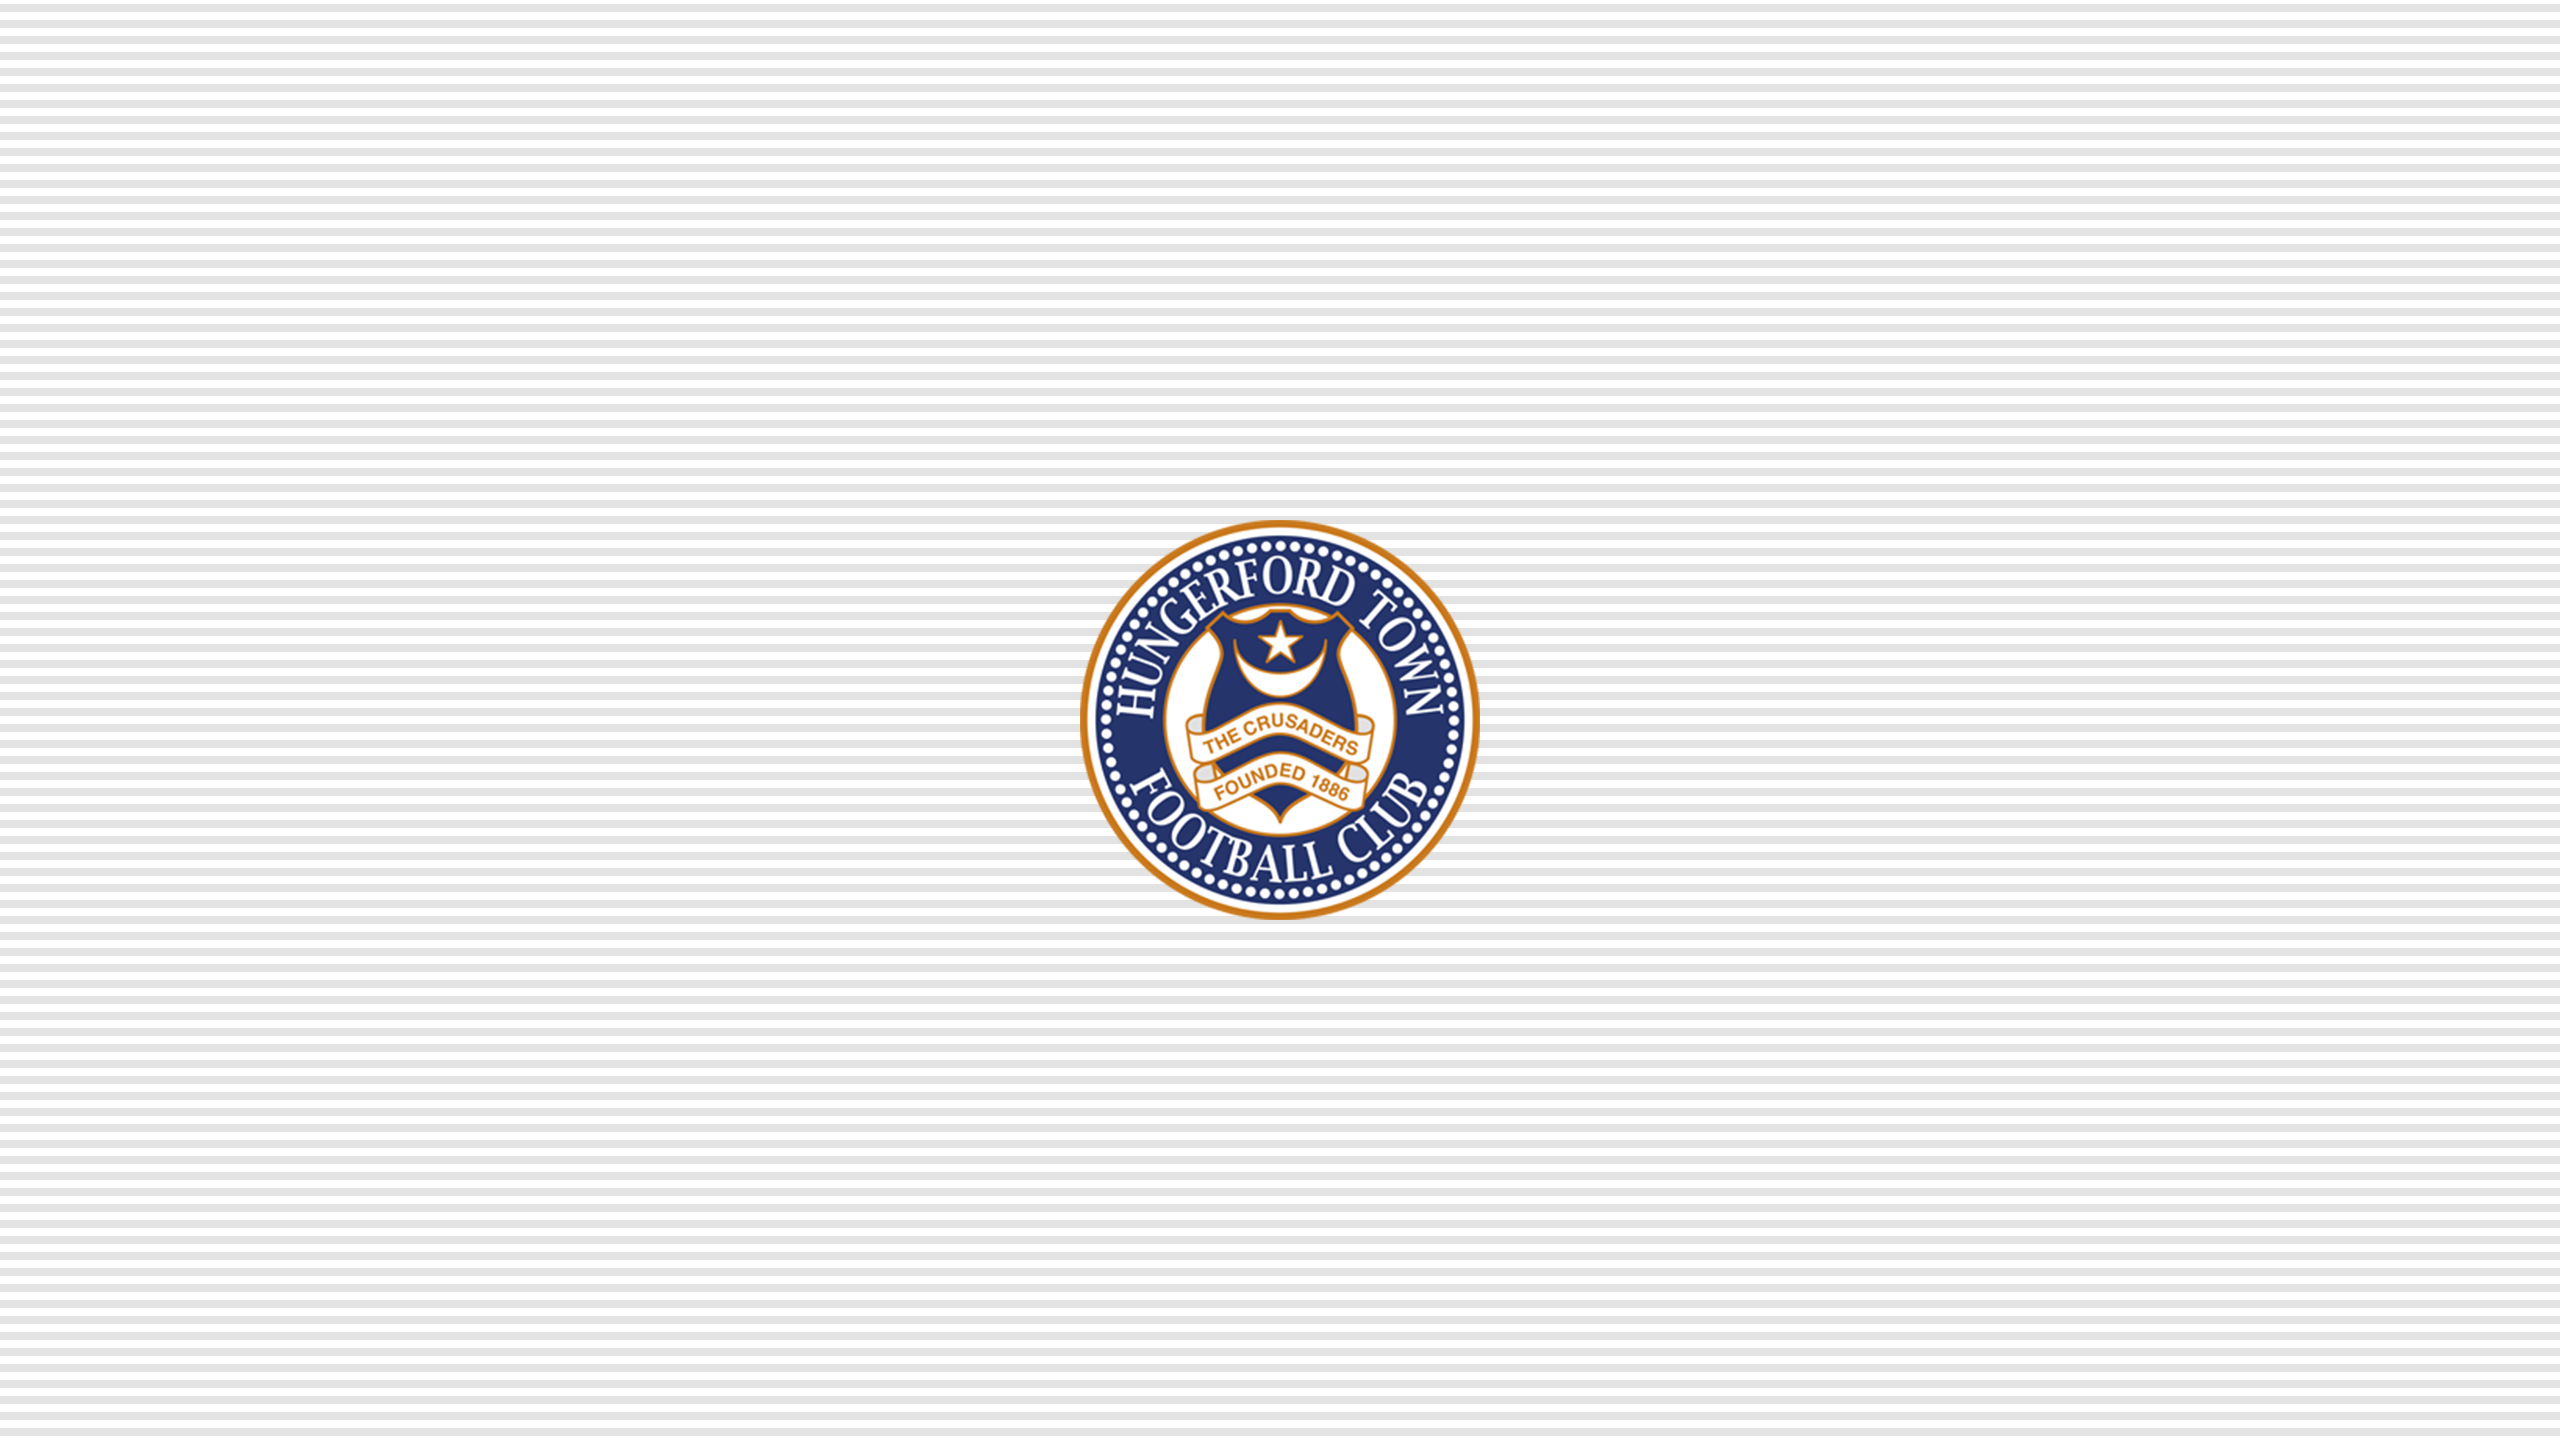 Sports Hungerford Town F.C. HD Wallpaper | Background Image